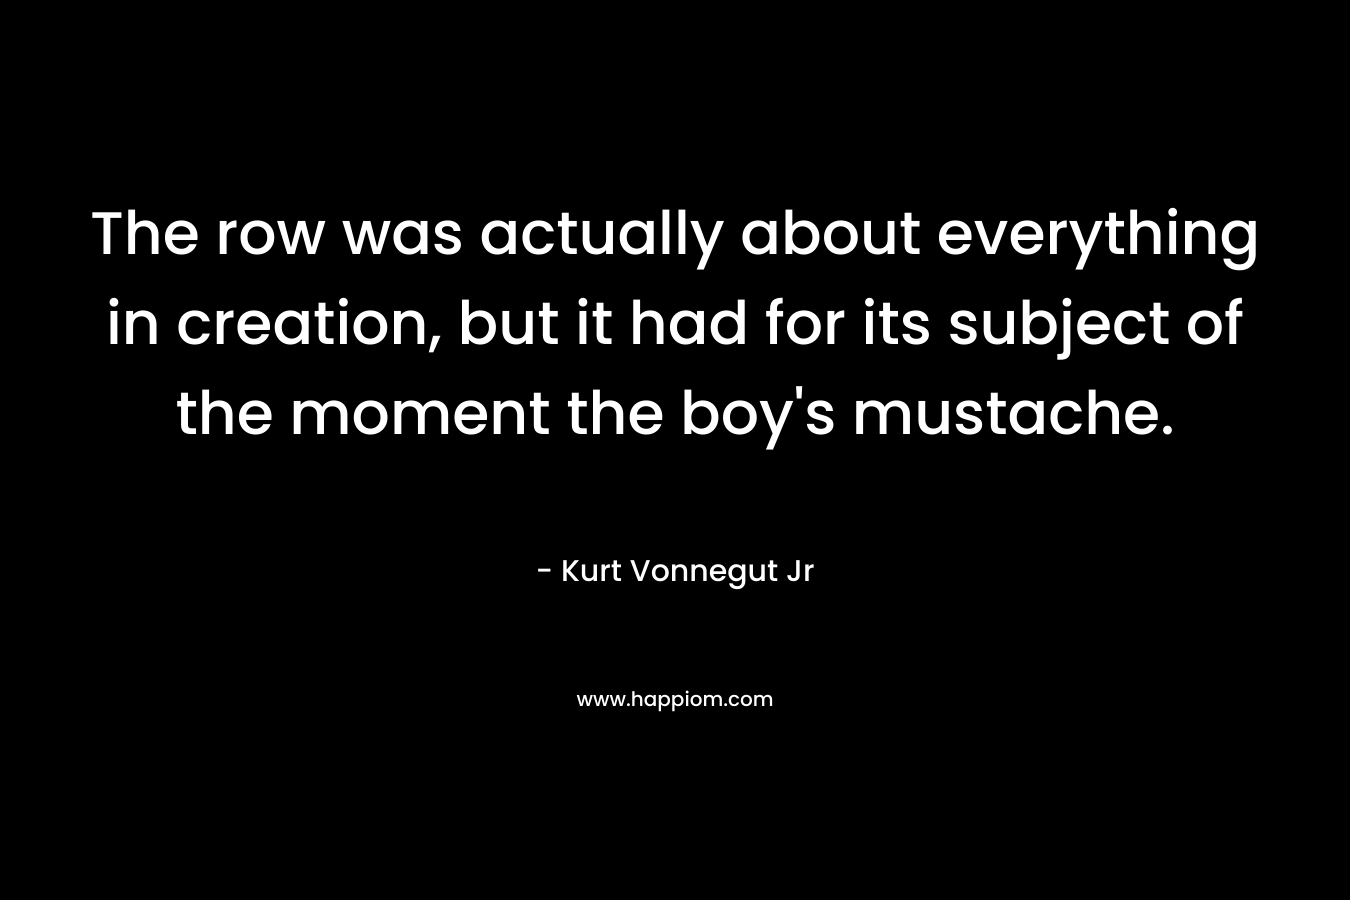 The row was actually about everything in creation, but it had for its subject of the moment the boy's mustache.